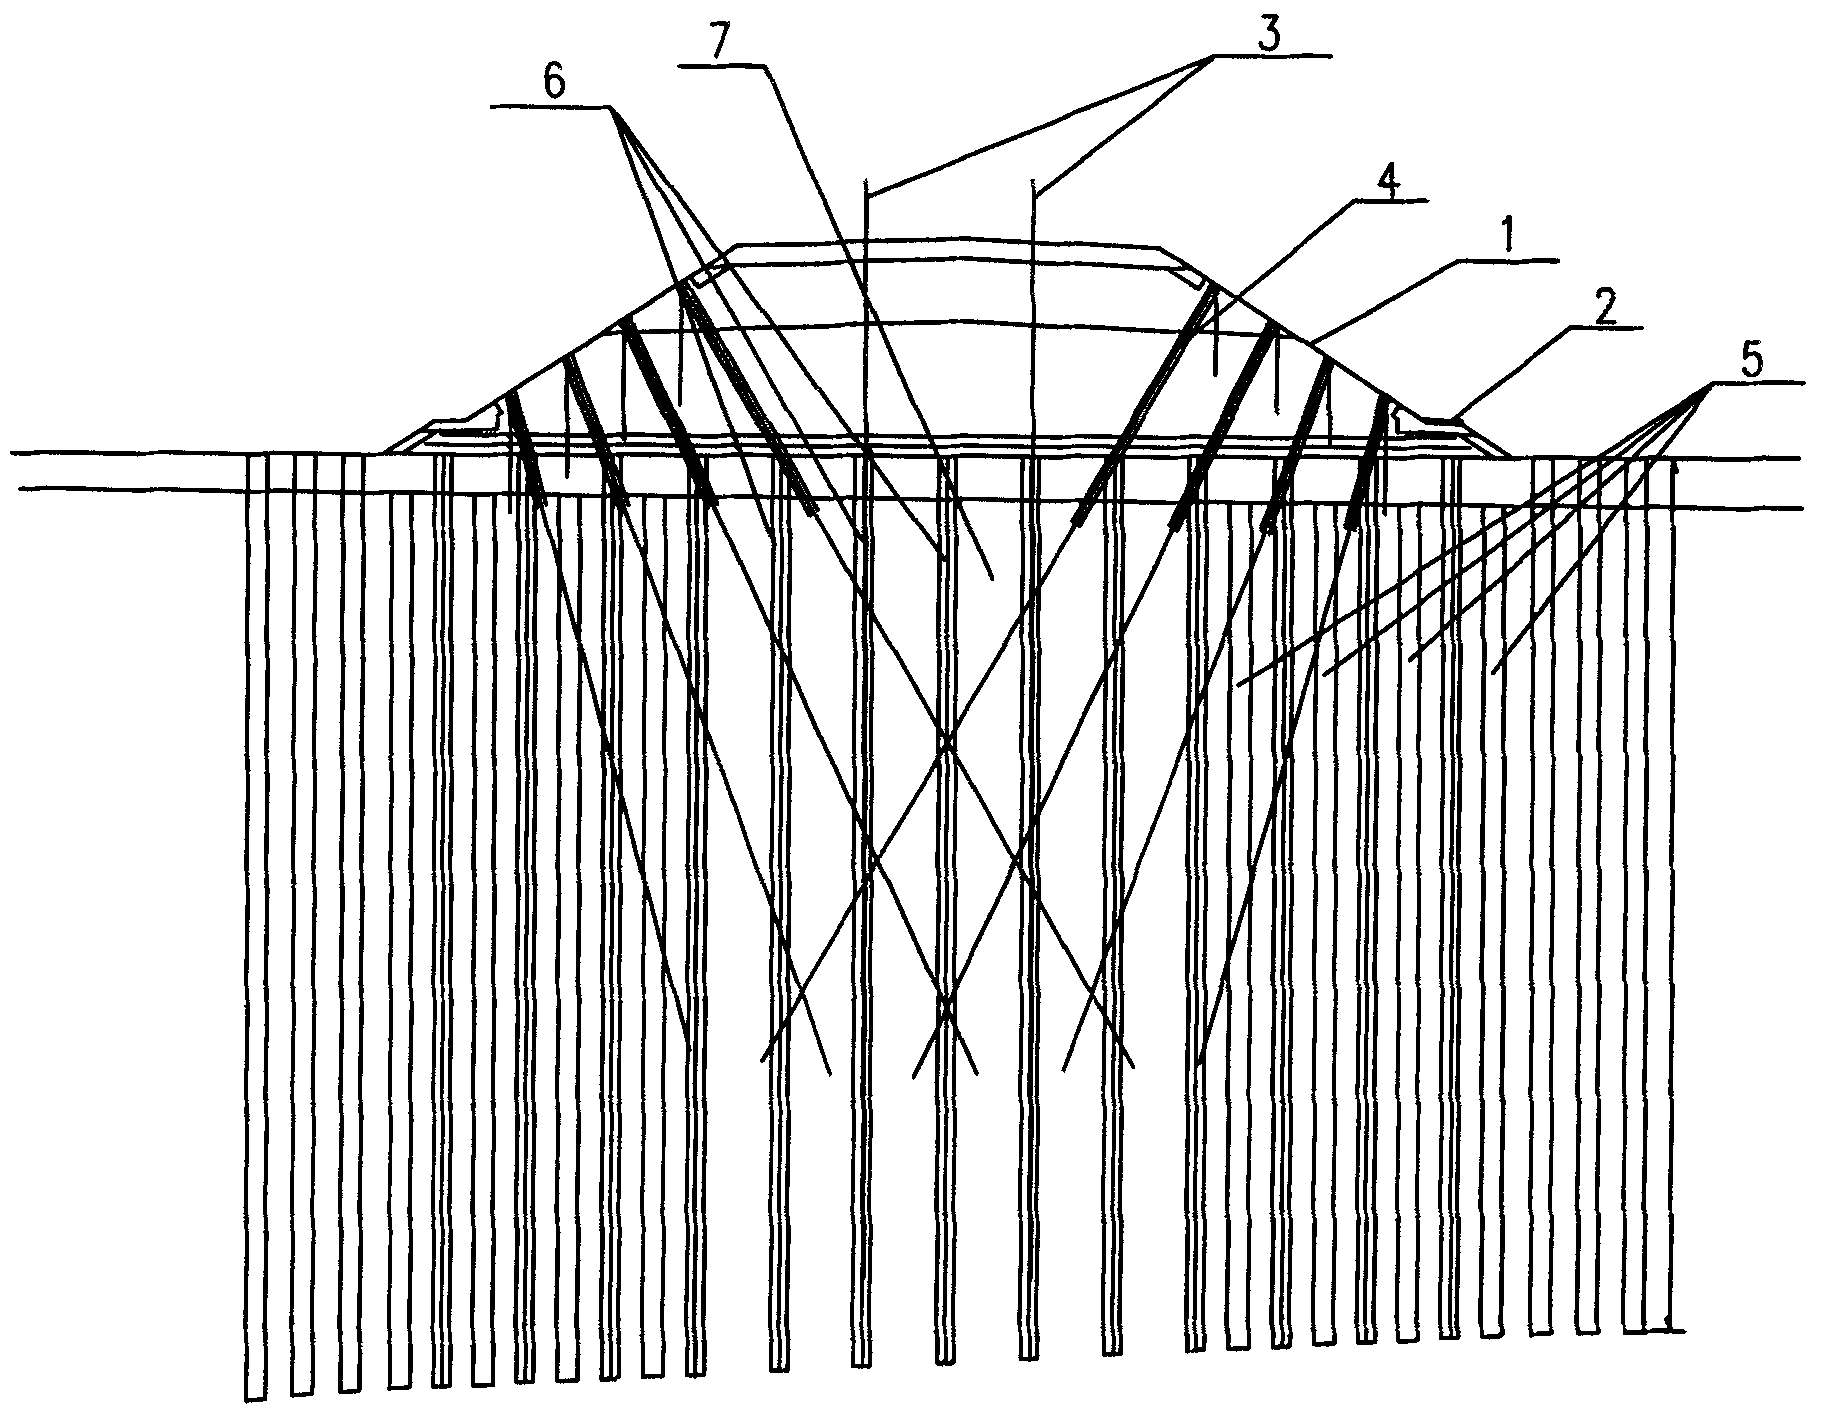 Soft foundation reinforcing method of existing railway or highway subgrade construction